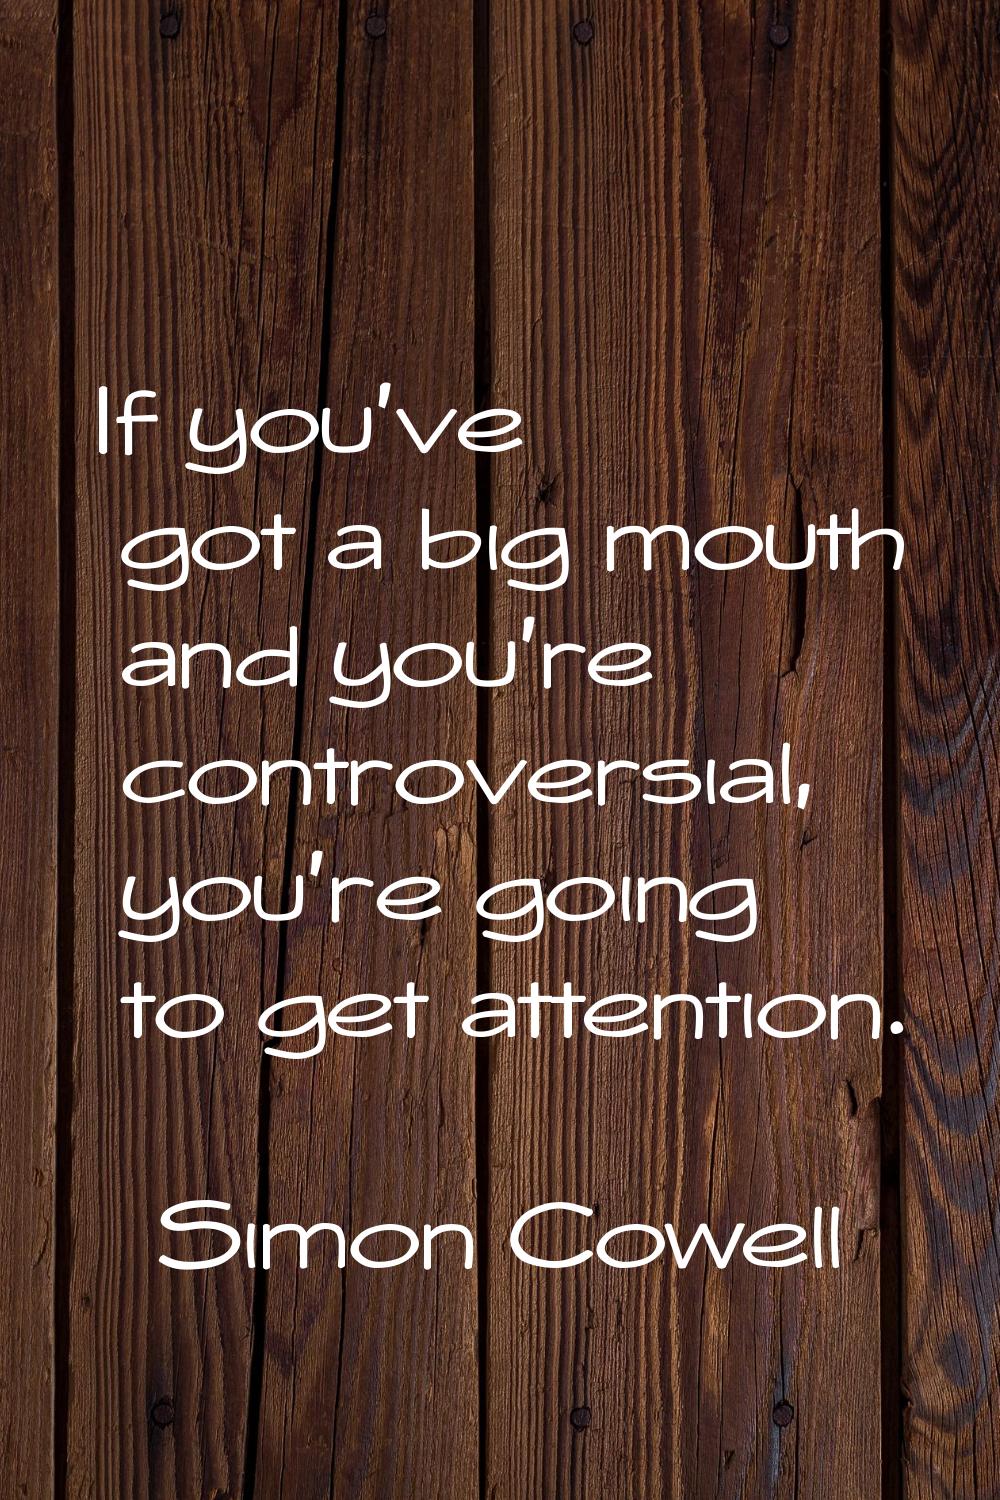 If you've got a big mouth and you're controversial, you're going to get attention.